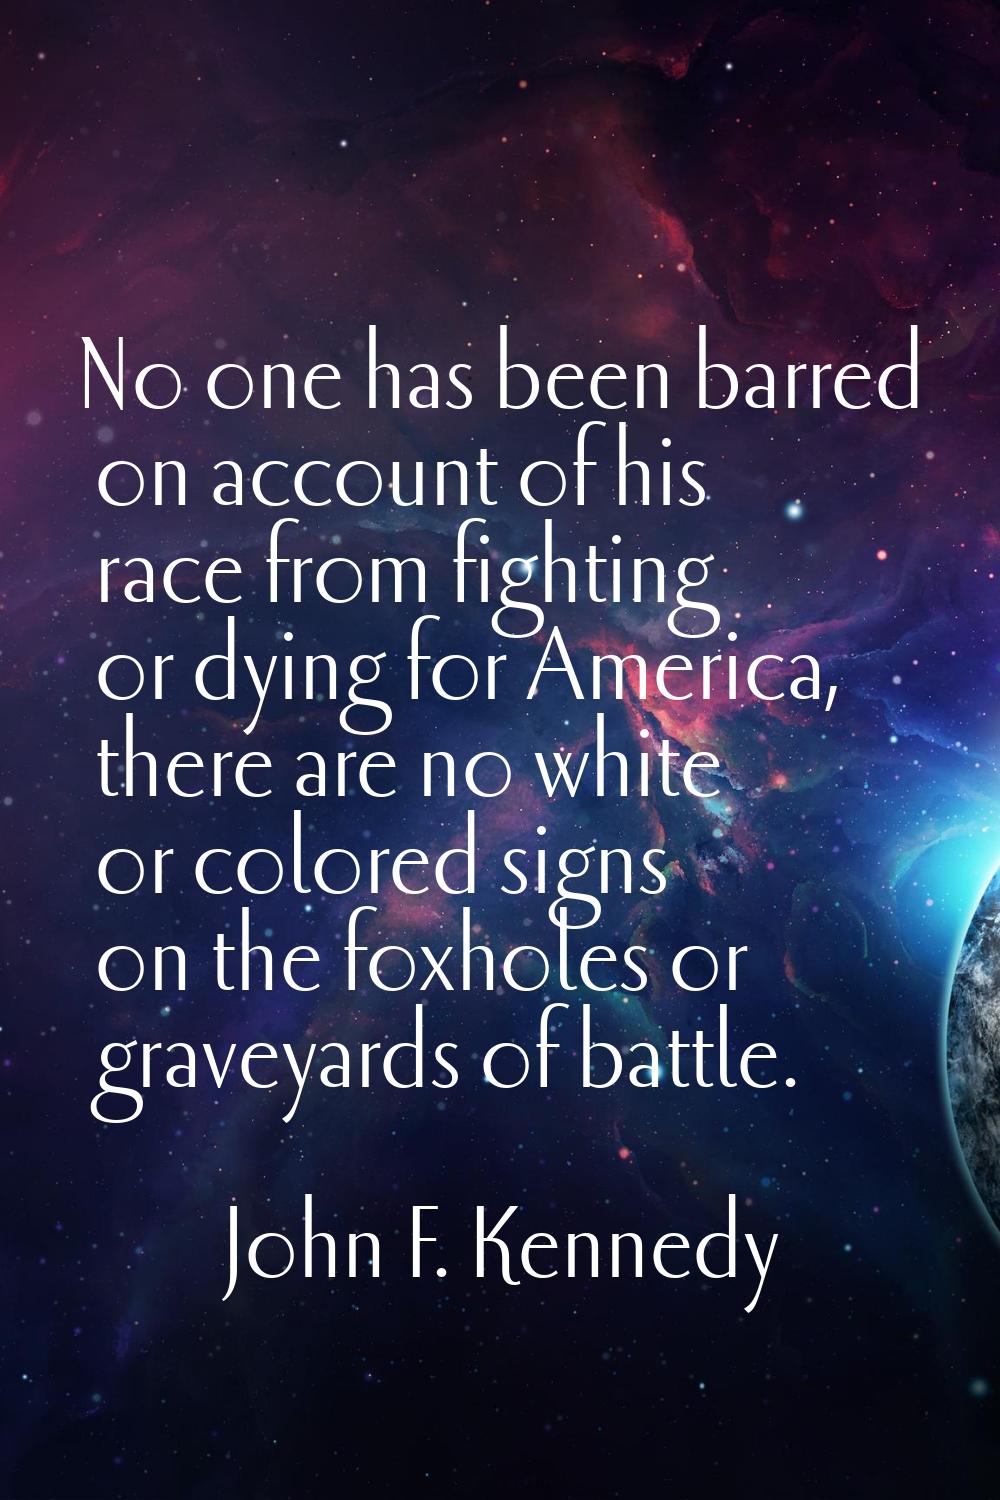 No one has been barred on account of his race from fighting or dying for America, there are no whit